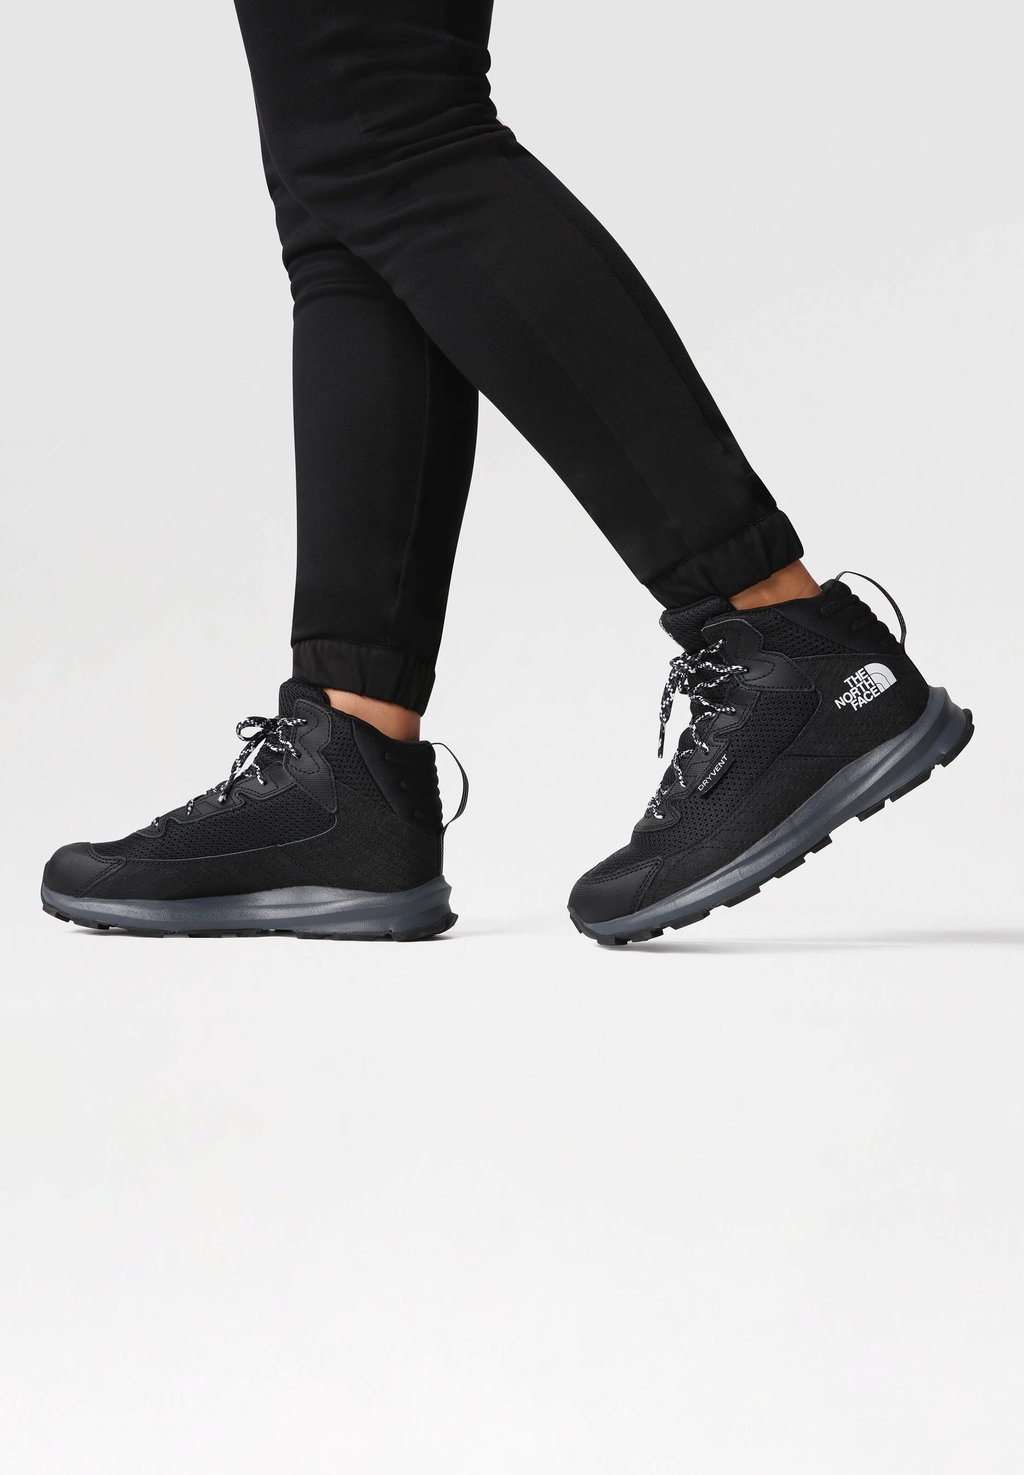 Кроссовки Y FASTPACK HIKER MID WP The North Face, цвет black